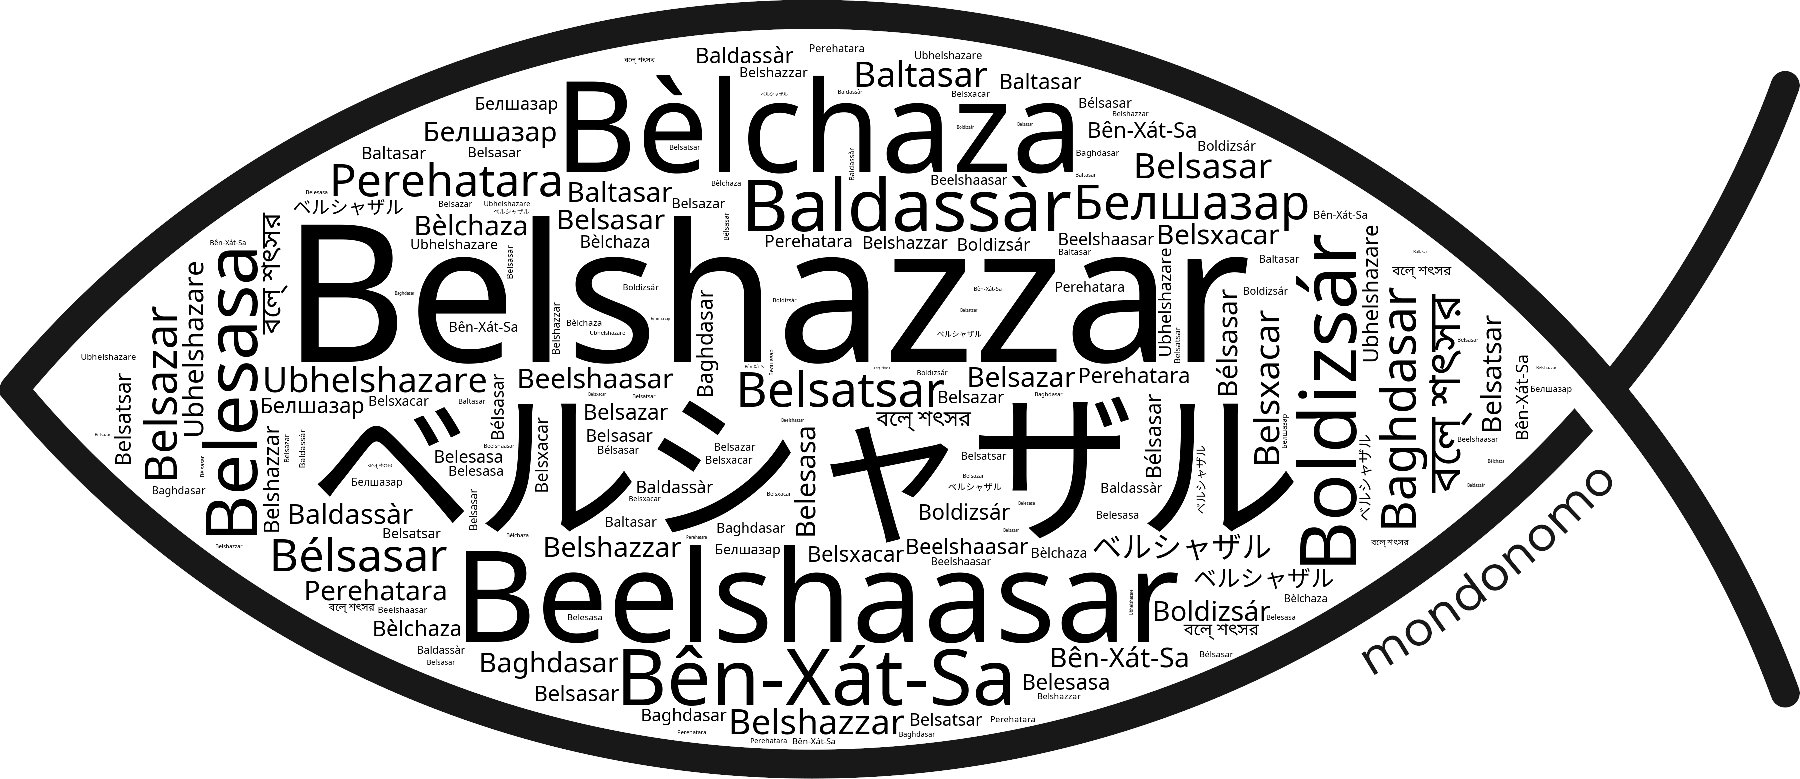 Name Belshazzar in the world's Bibles